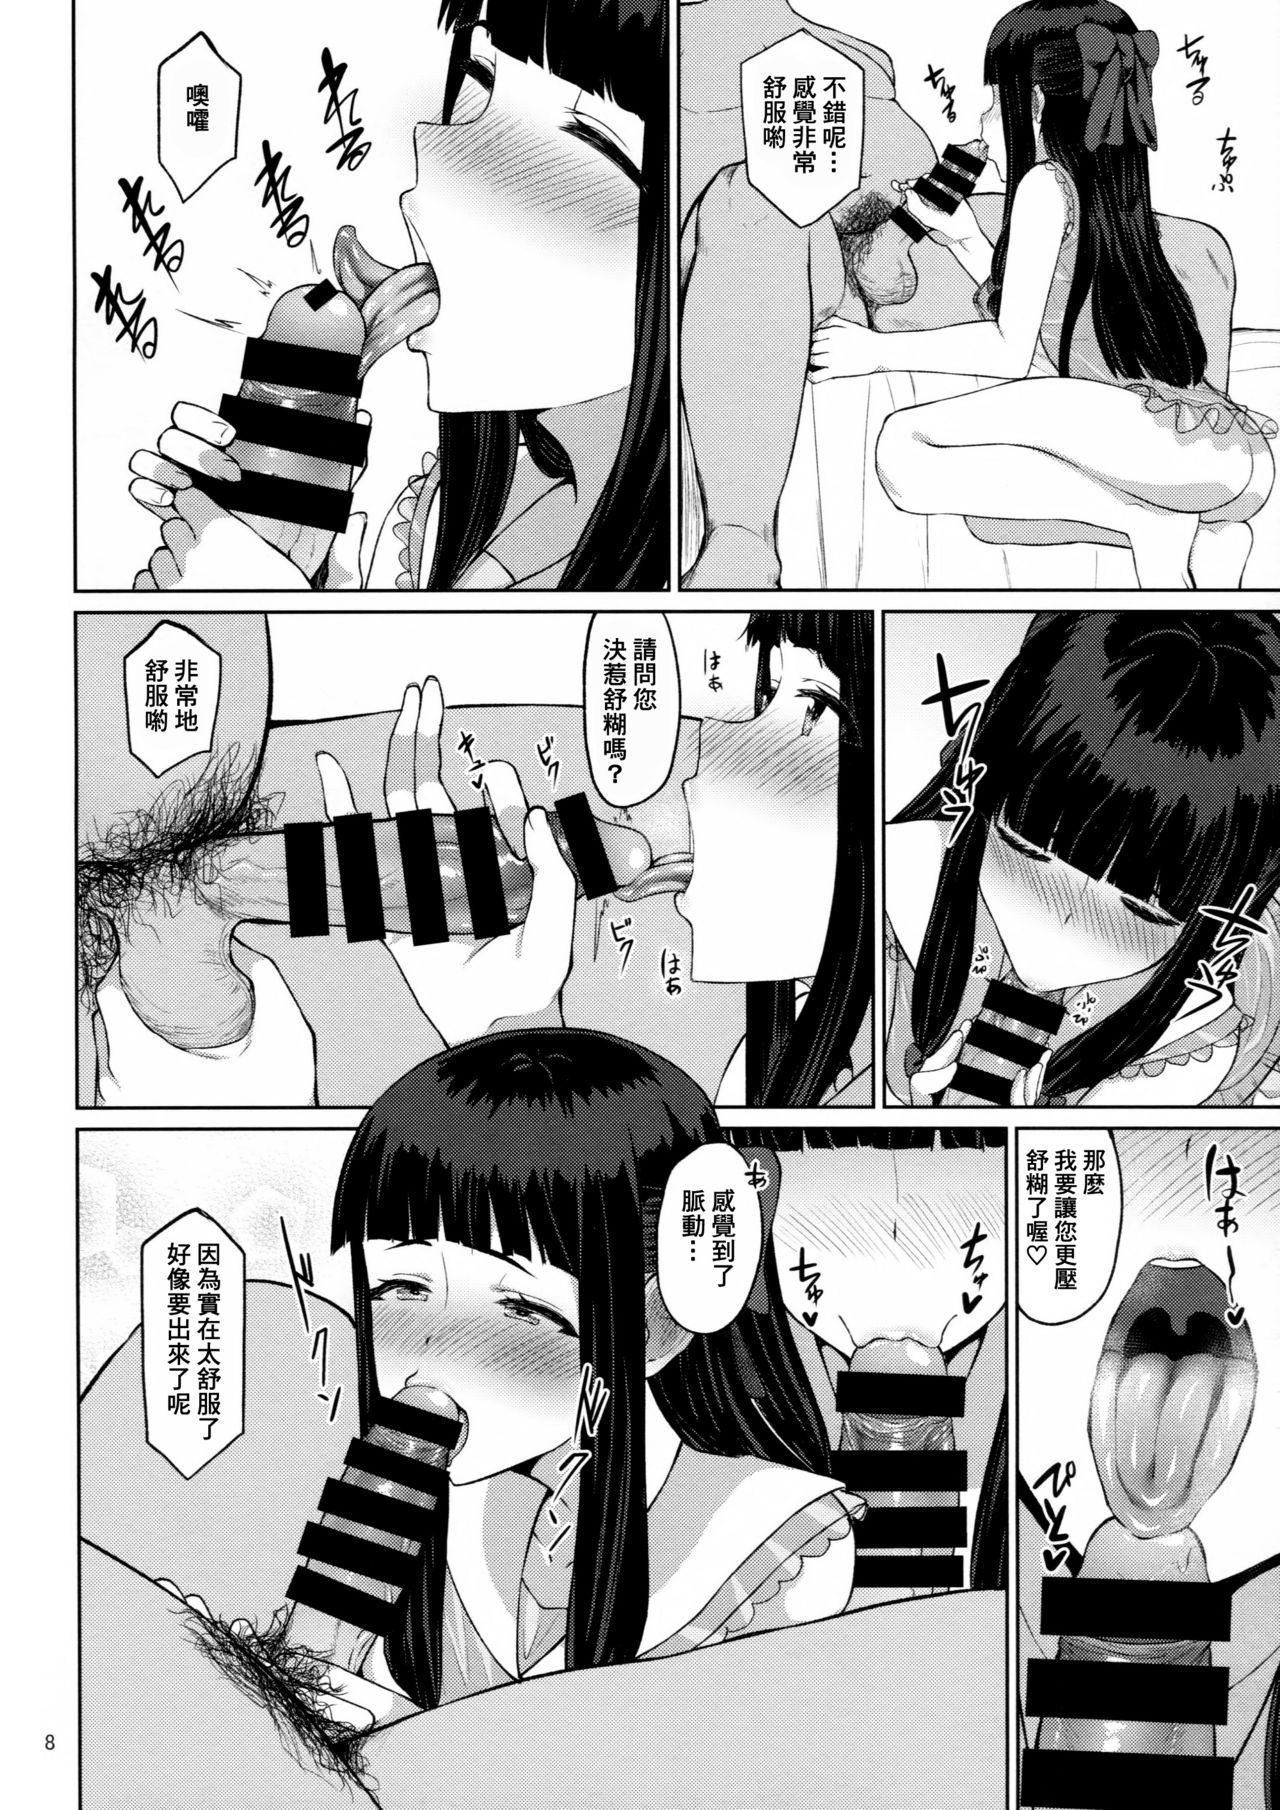 Free Blowjob D.EMOTION - Tokyo 7th sisters Maid - Page 8